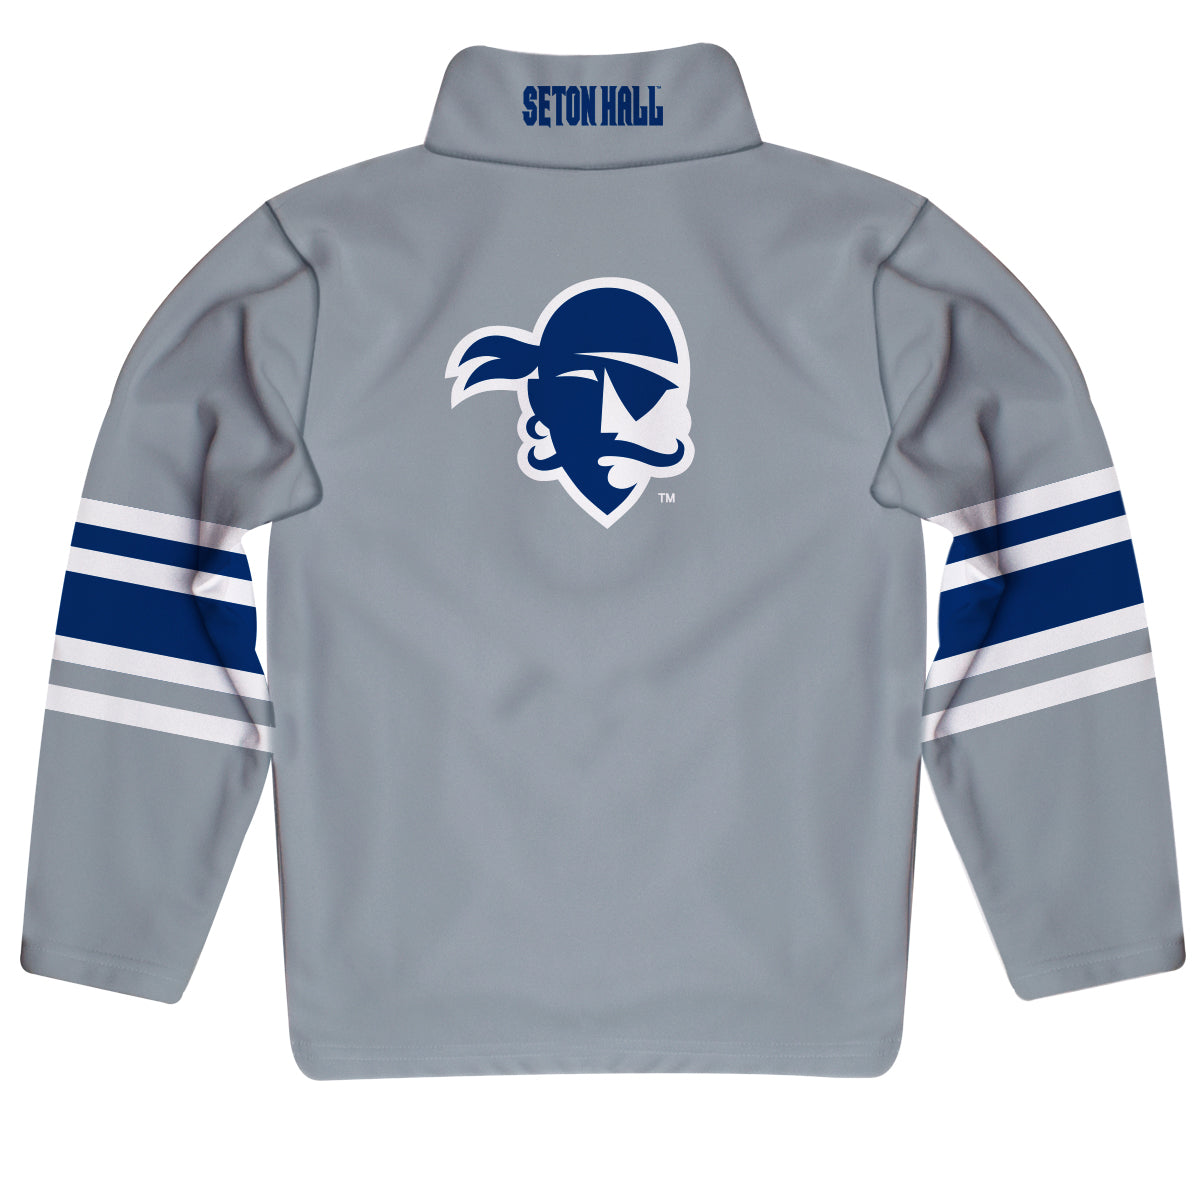 Seton Hall Pirates Game Day Gray Quarter Zip Pullover for Infants Toddlers by Vive La Fete